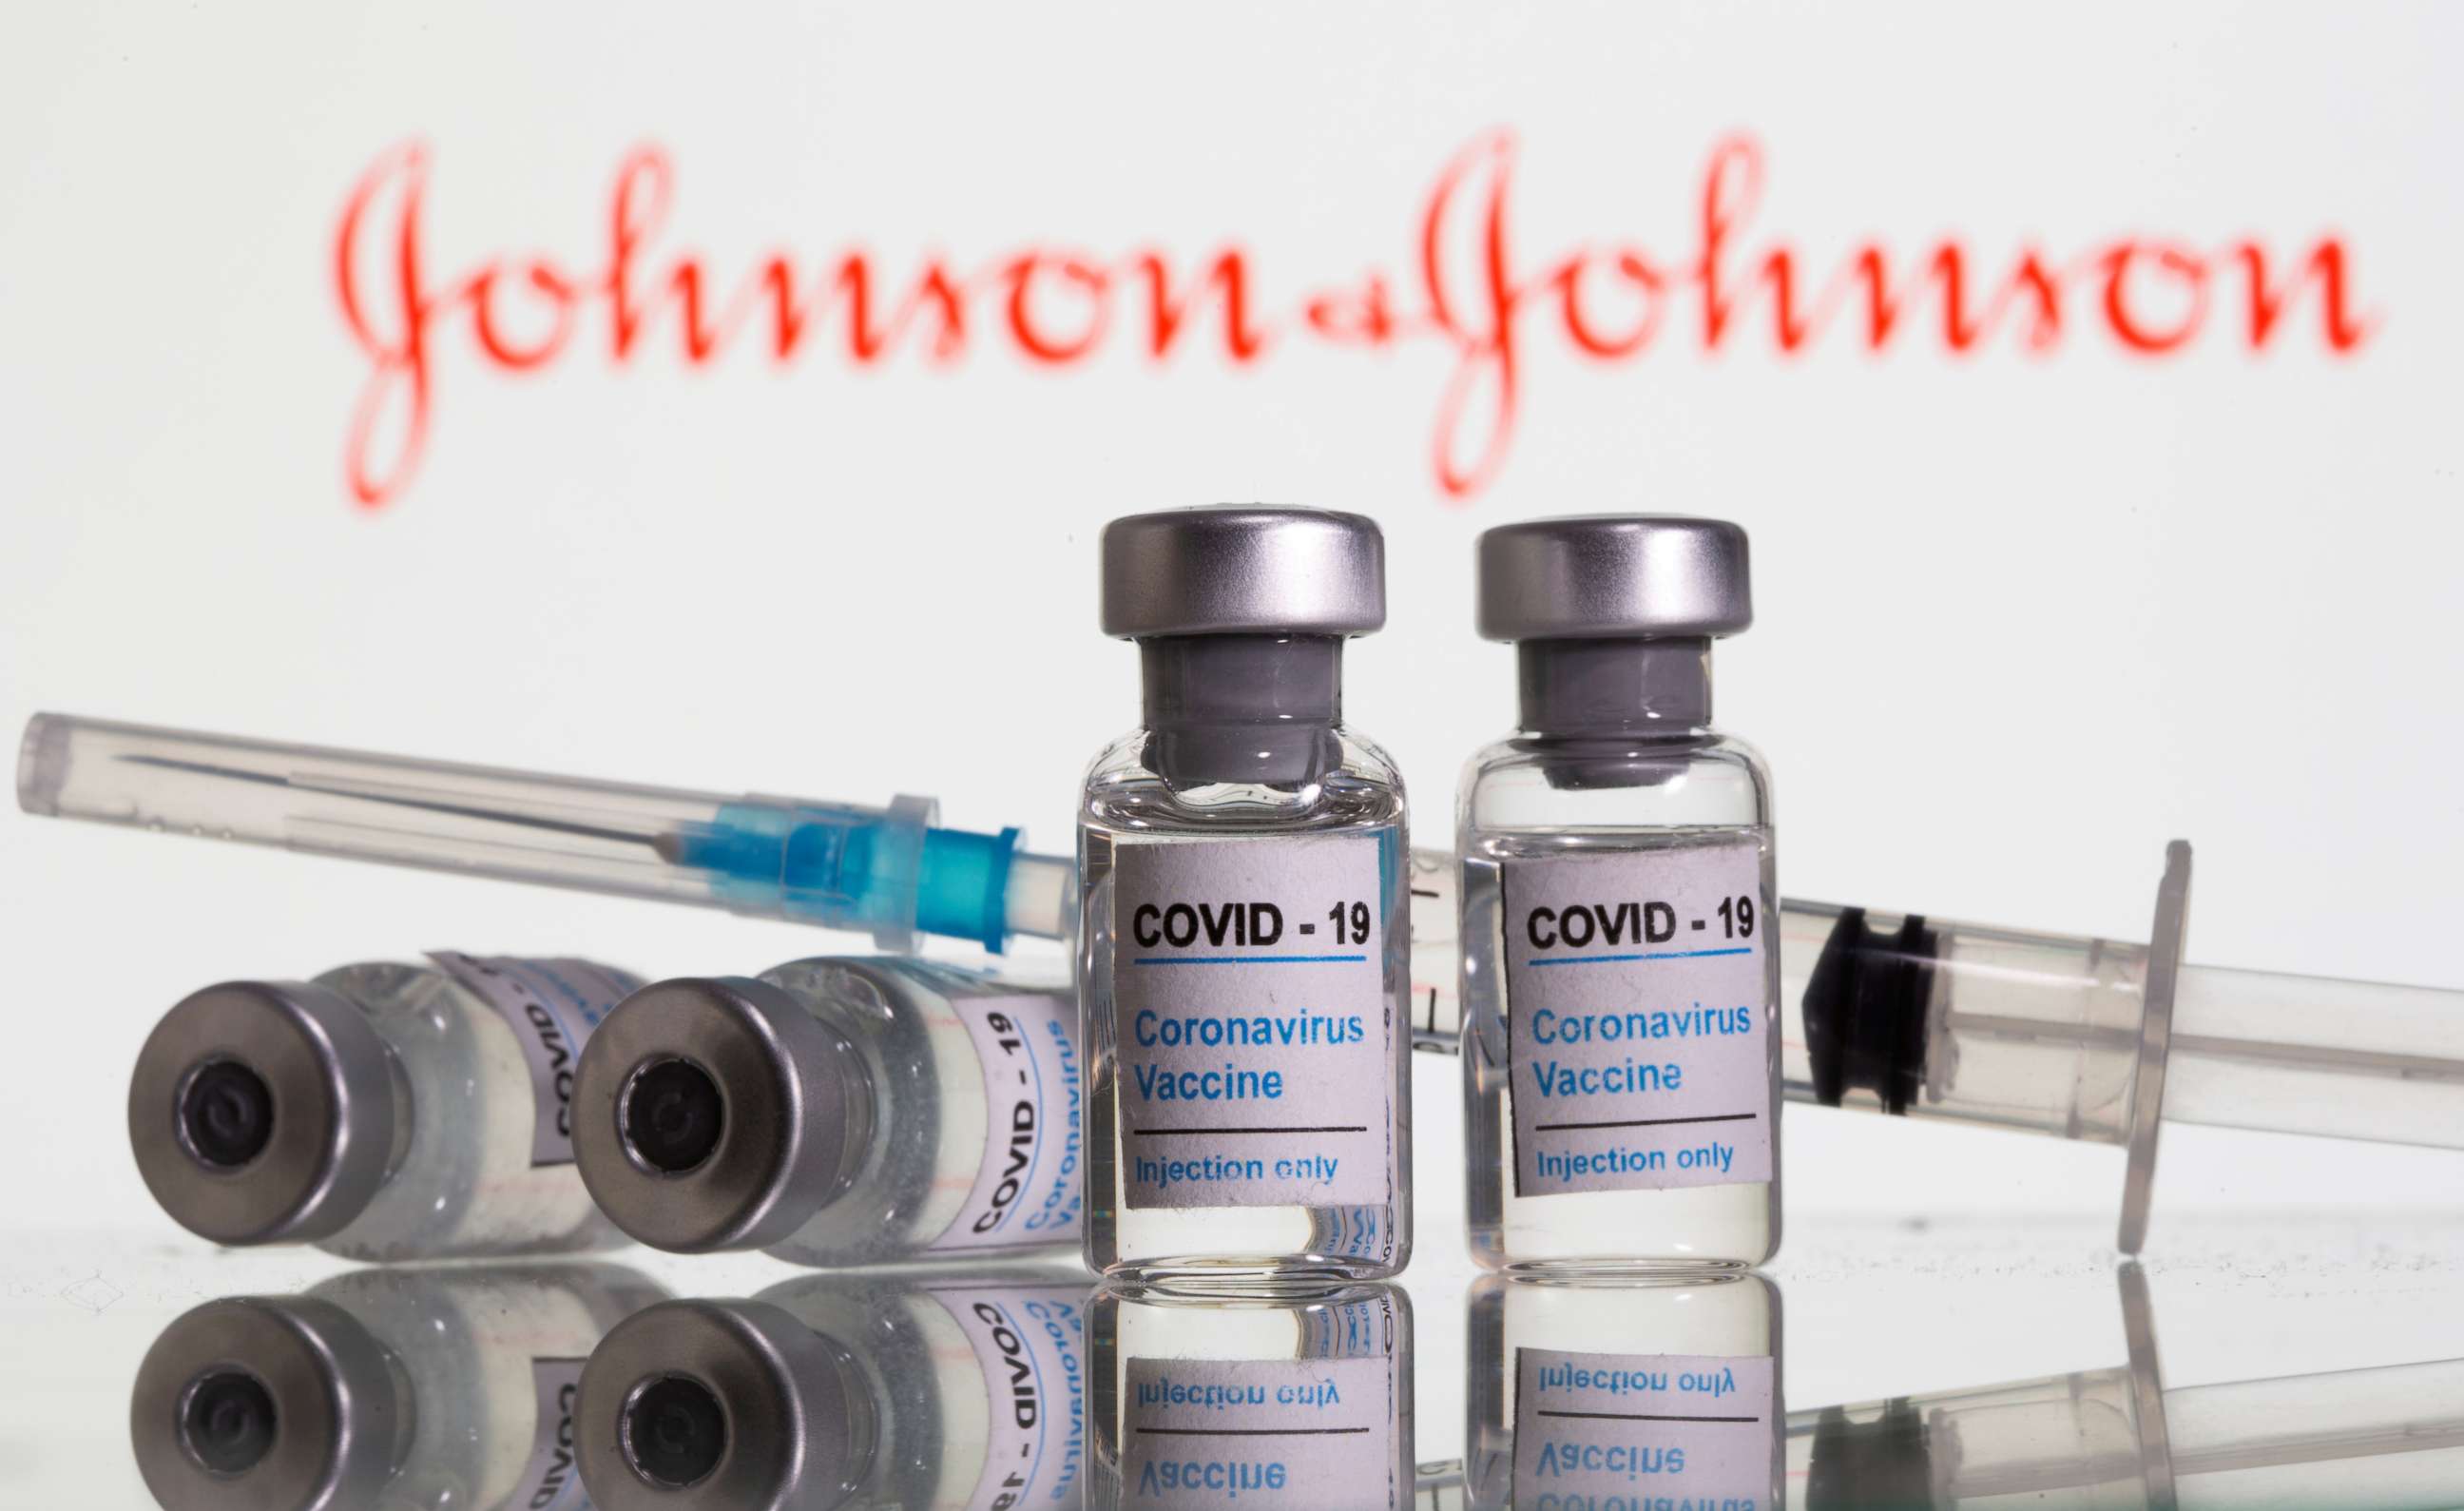 FILE PHOTO: Vials labelled "COVID-19 Coronavirus Vaccine" and syringe are seen in front of displayed Johnson & Johnson logo in this illustration taken, February 9, 2021. 